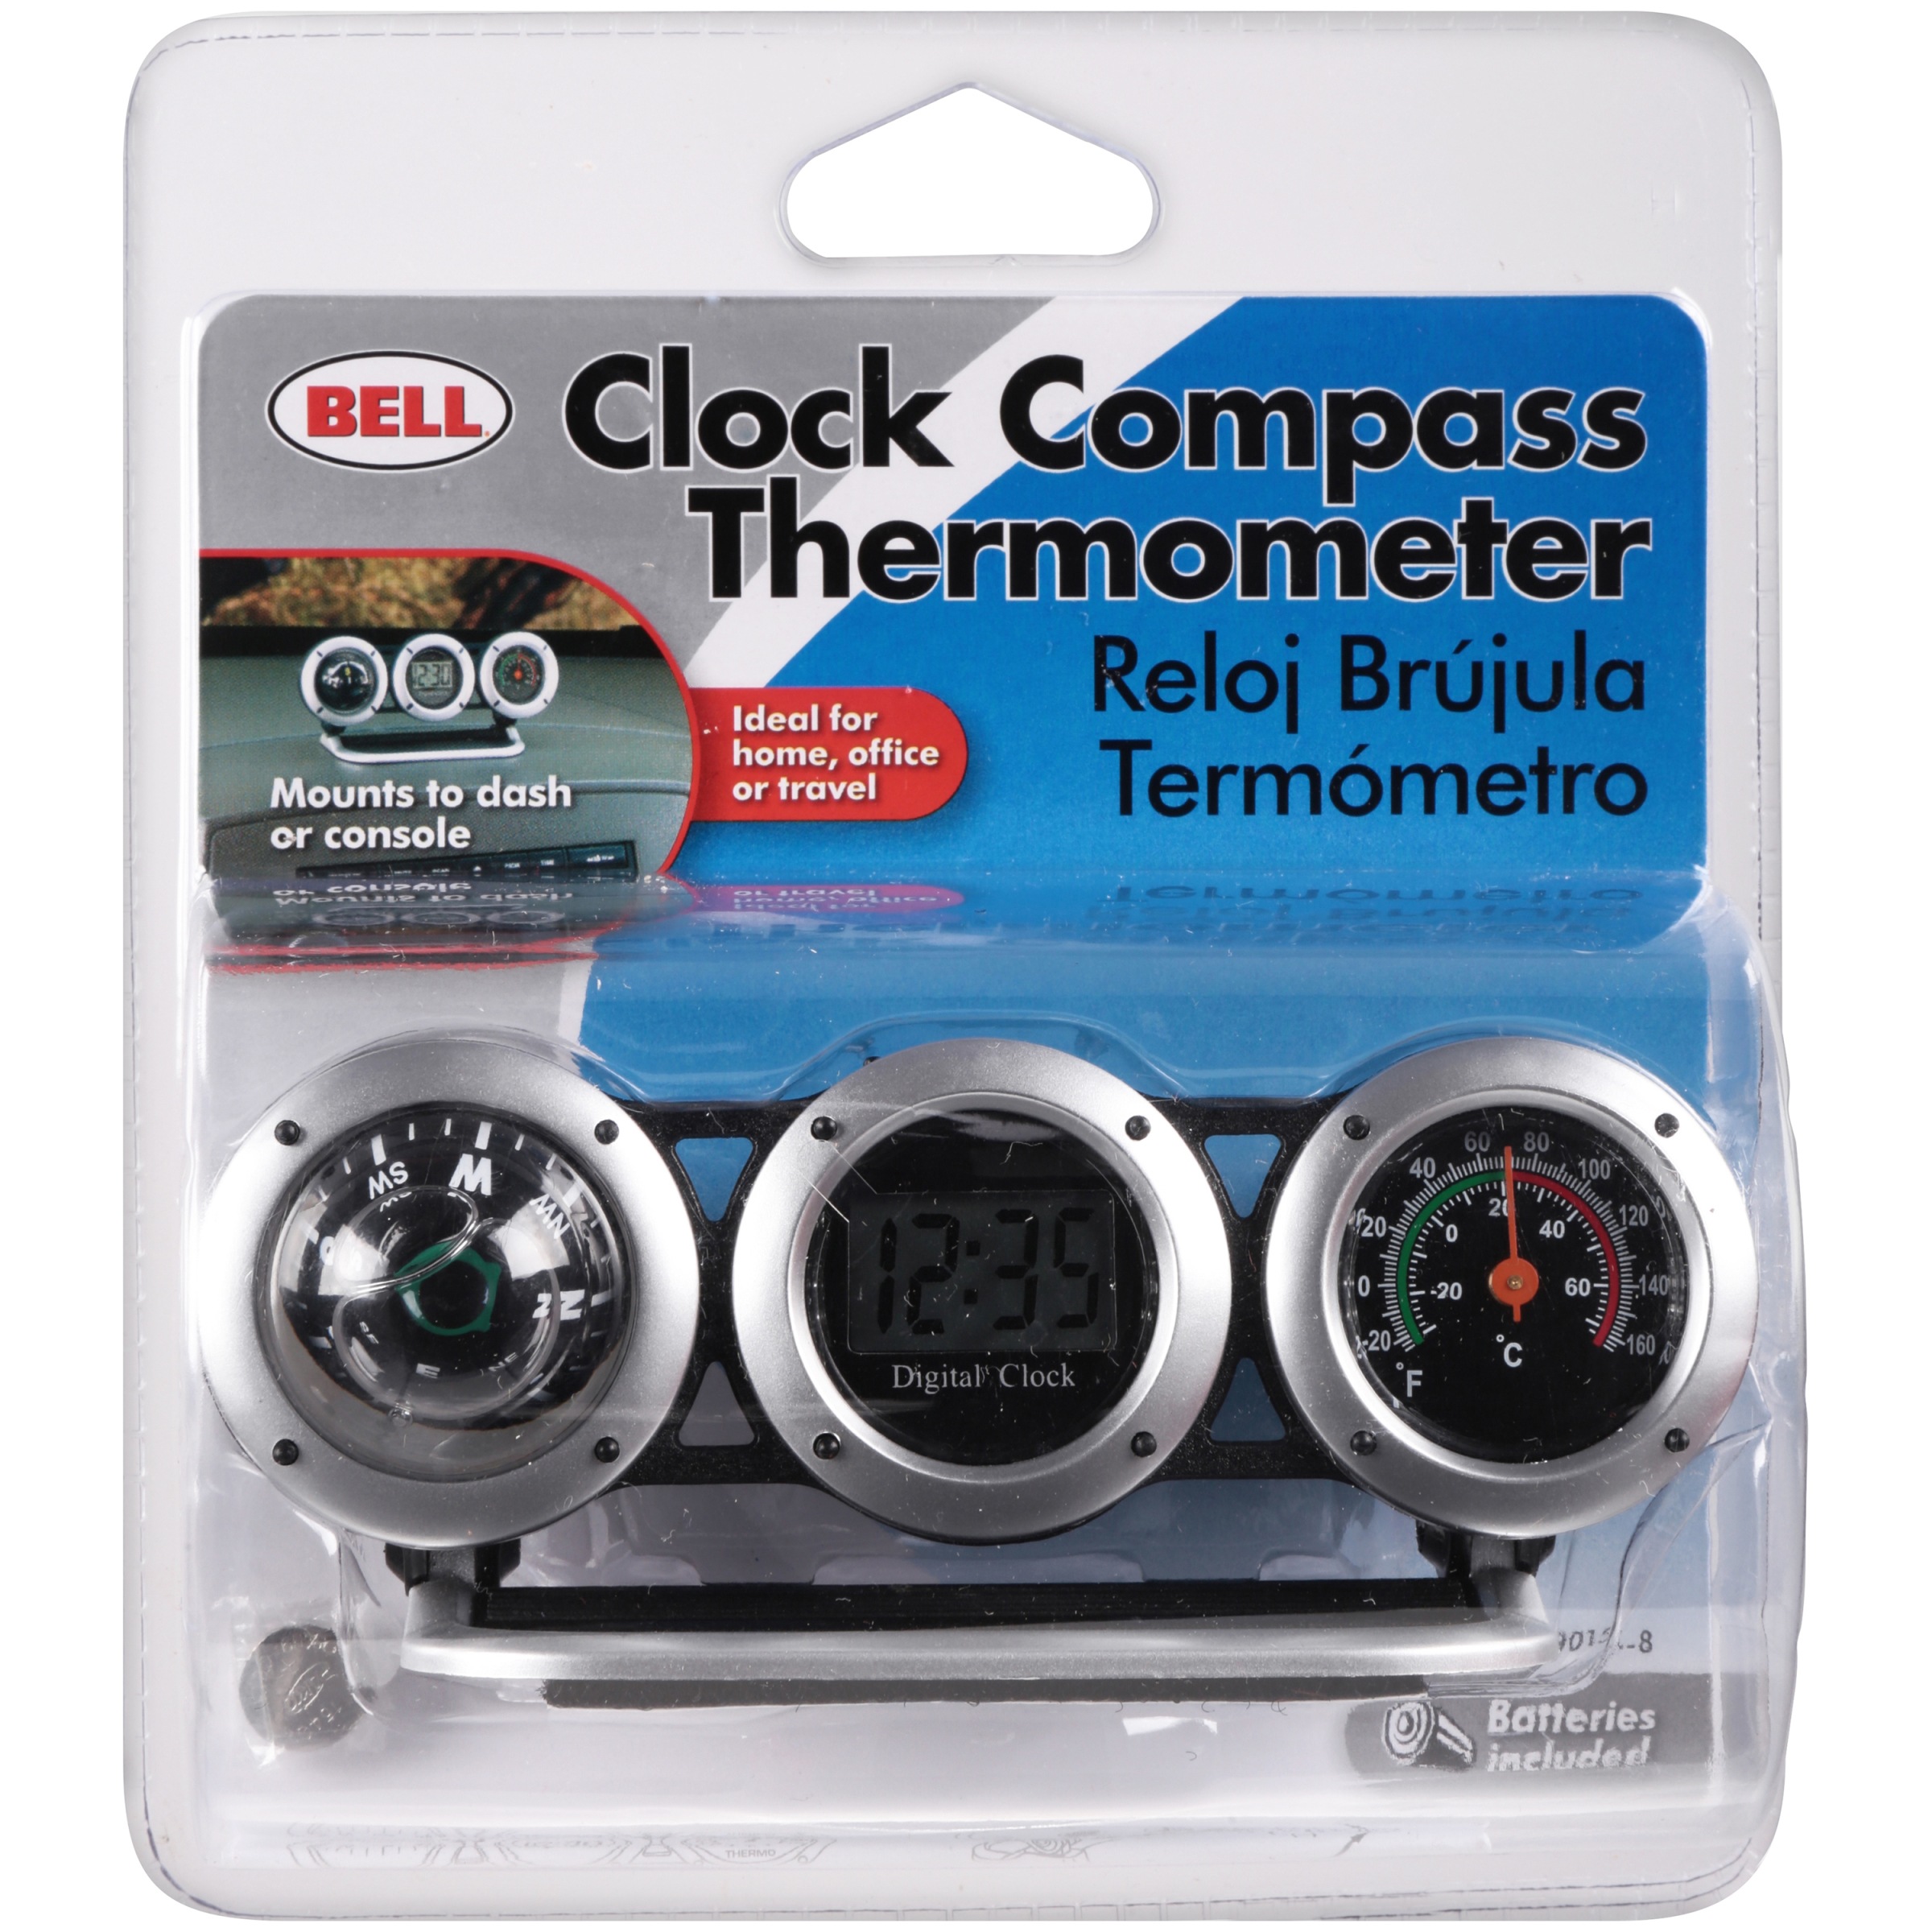 Bell® Clock Compass Thermometer - image 3 of 10